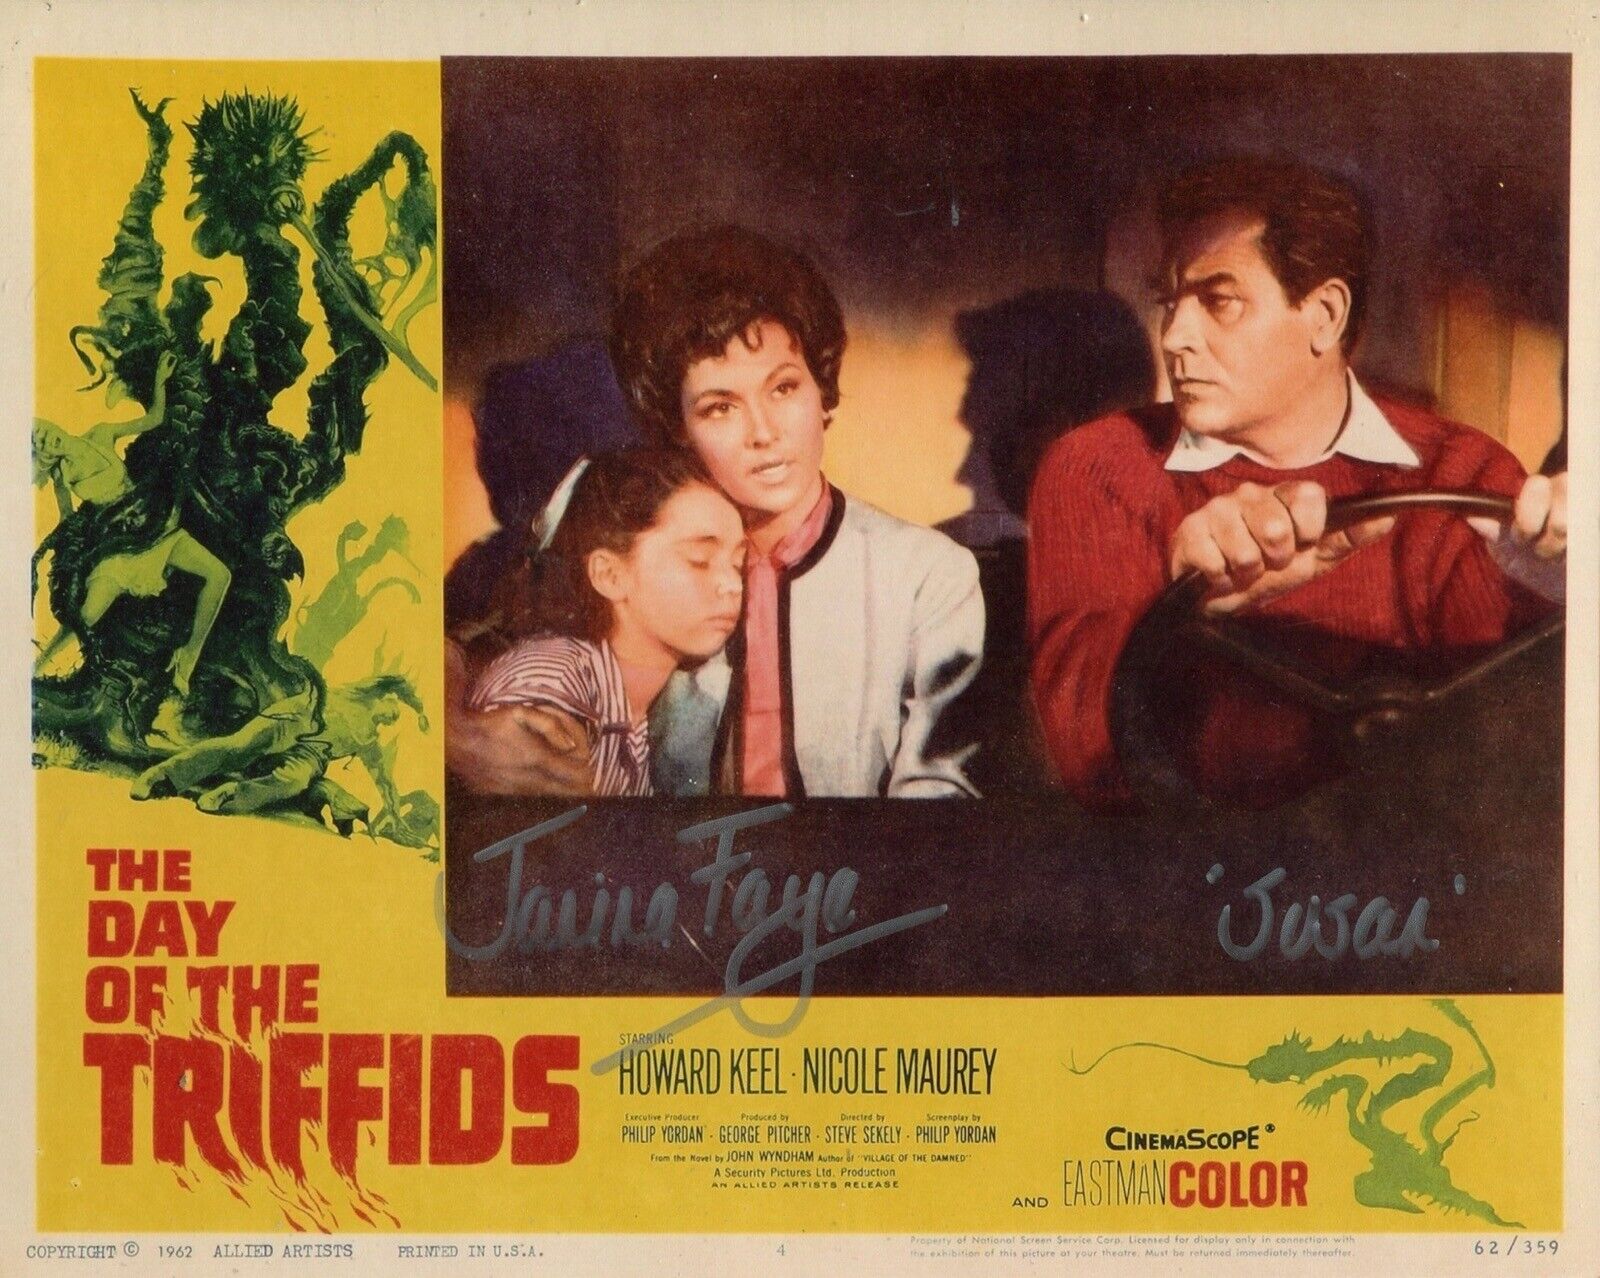 The Day of the Triffids 1962 sci-fi movie photo signed by actress Janina Faye 10 x 8 colour picture.